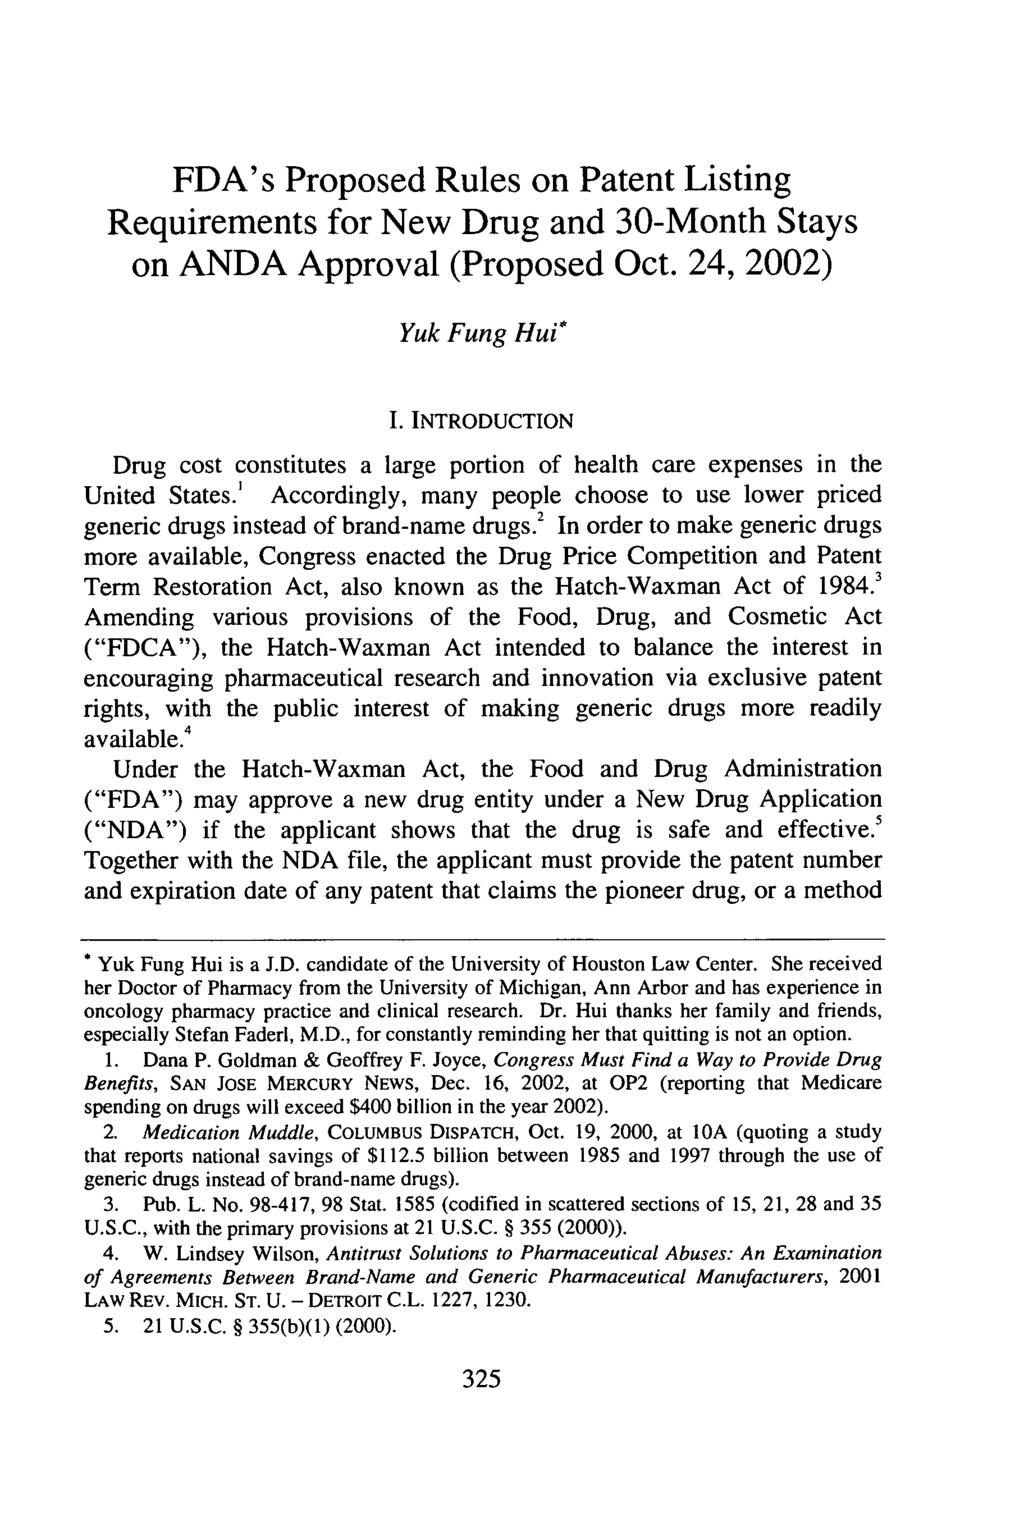 Hui: FDA's Proposed Rules on Patent Listing Requirements for New Drug FDA's Proposed Rules on Patent Listing Requirements for New Drug and 30-Month Stays on ANDA Approval (Proposed Oct.